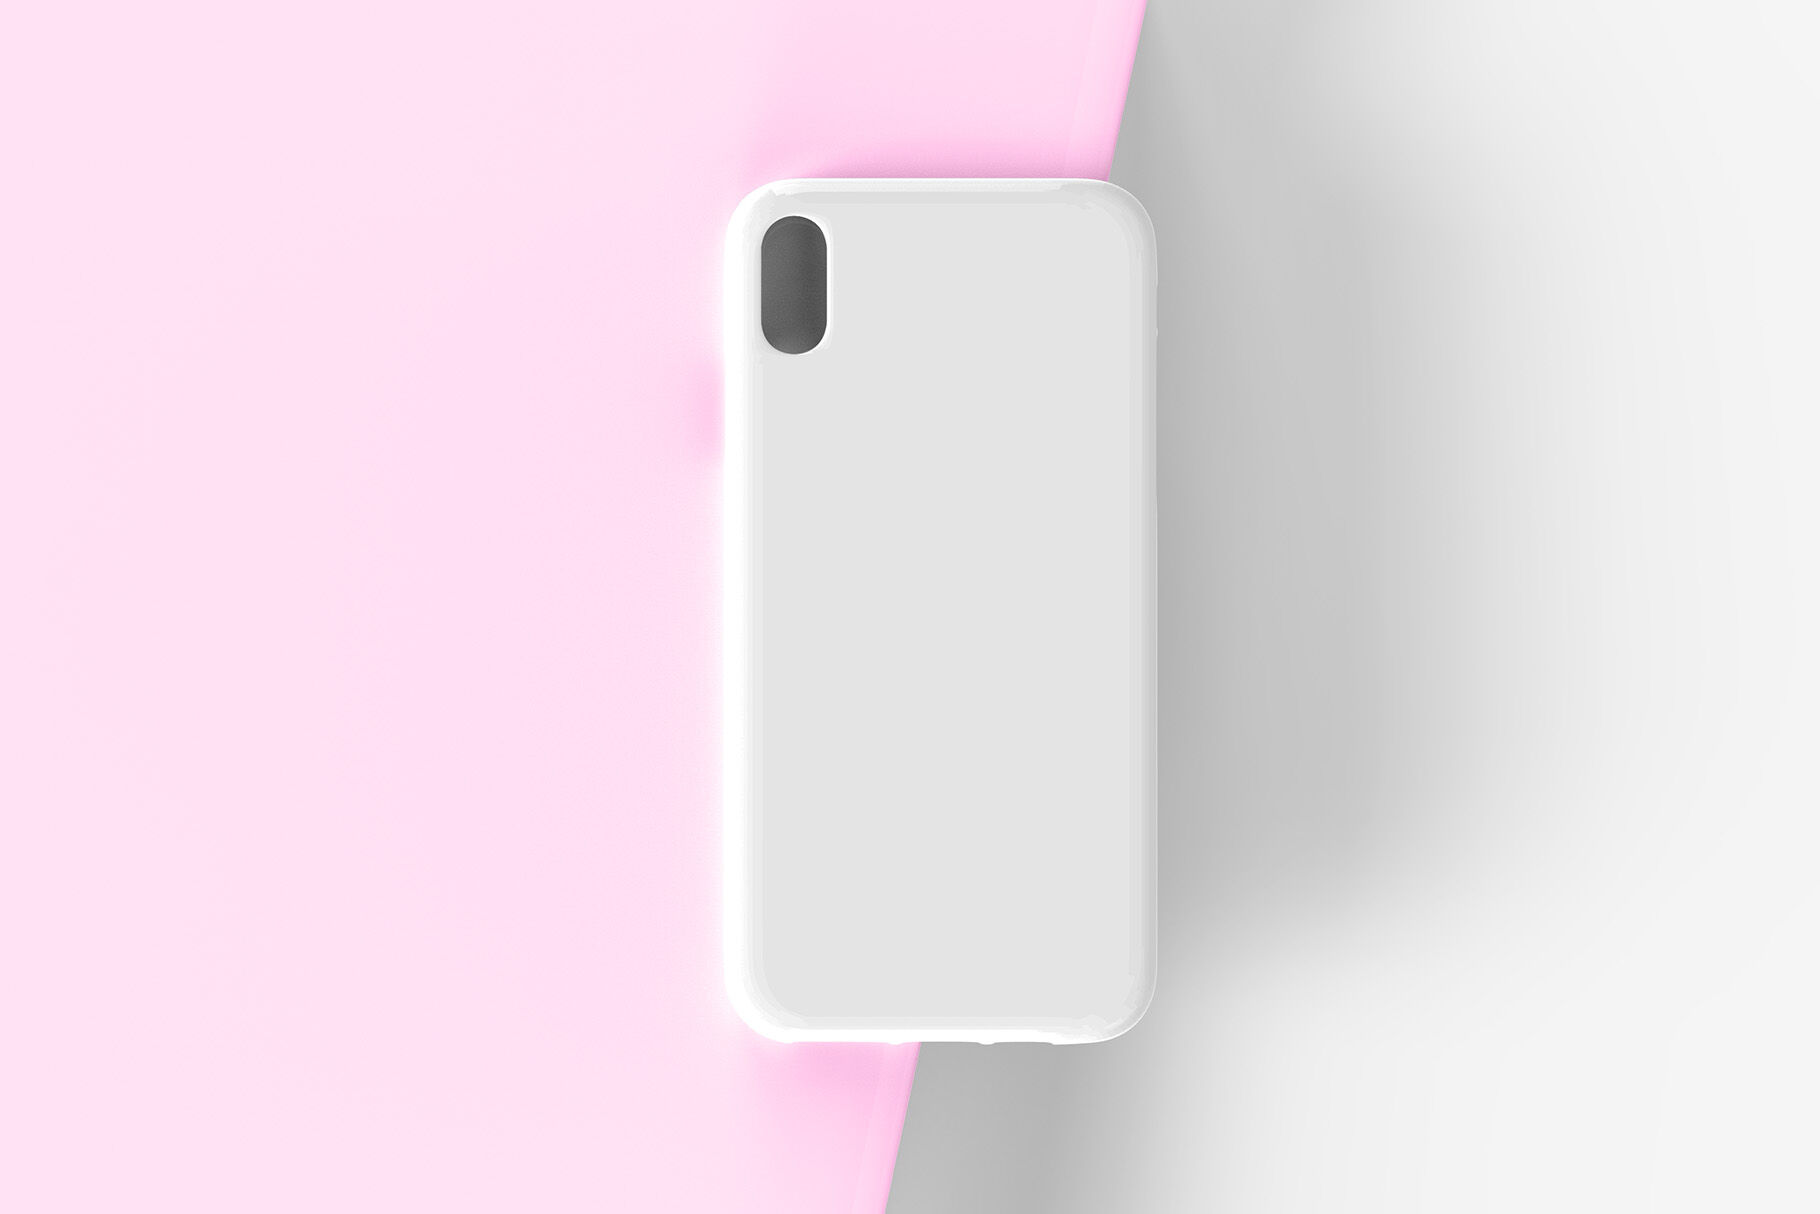 Download Phone Case Mockup - 8 Views By Illusiongraphic | TheHungryJPEG.com